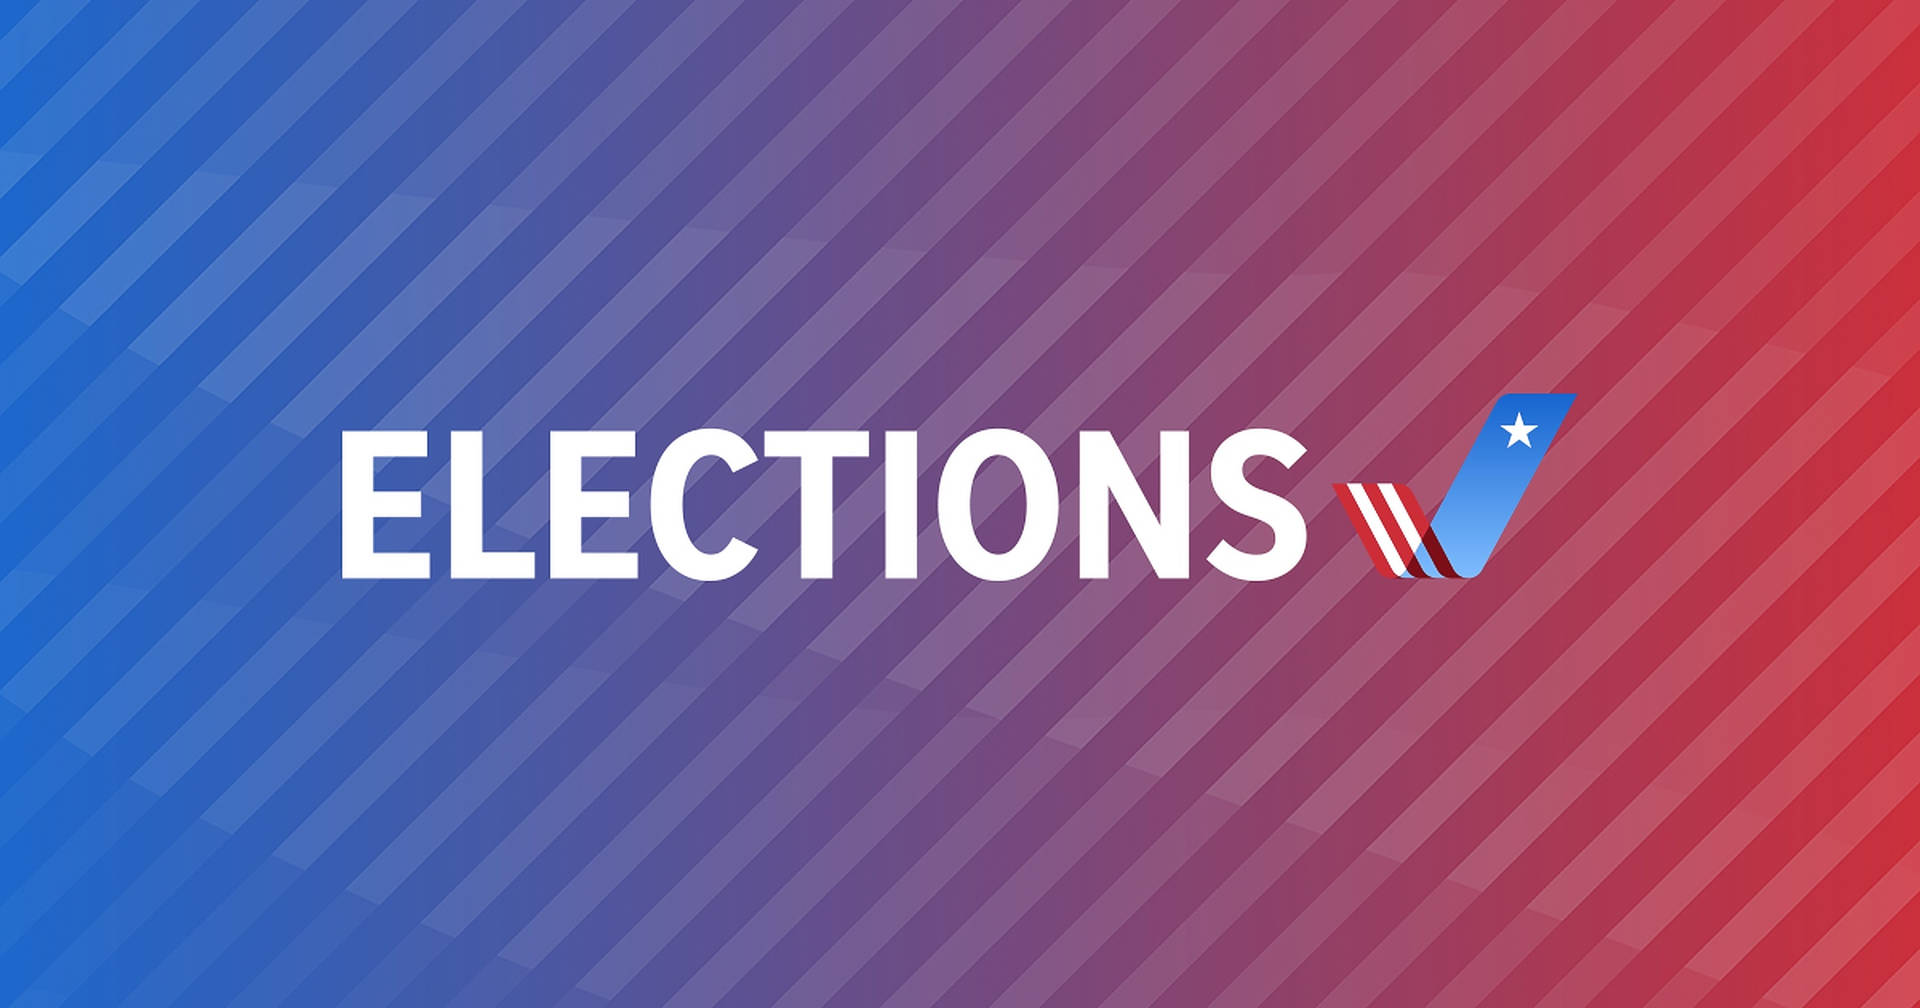 Election Gradient Poster Background